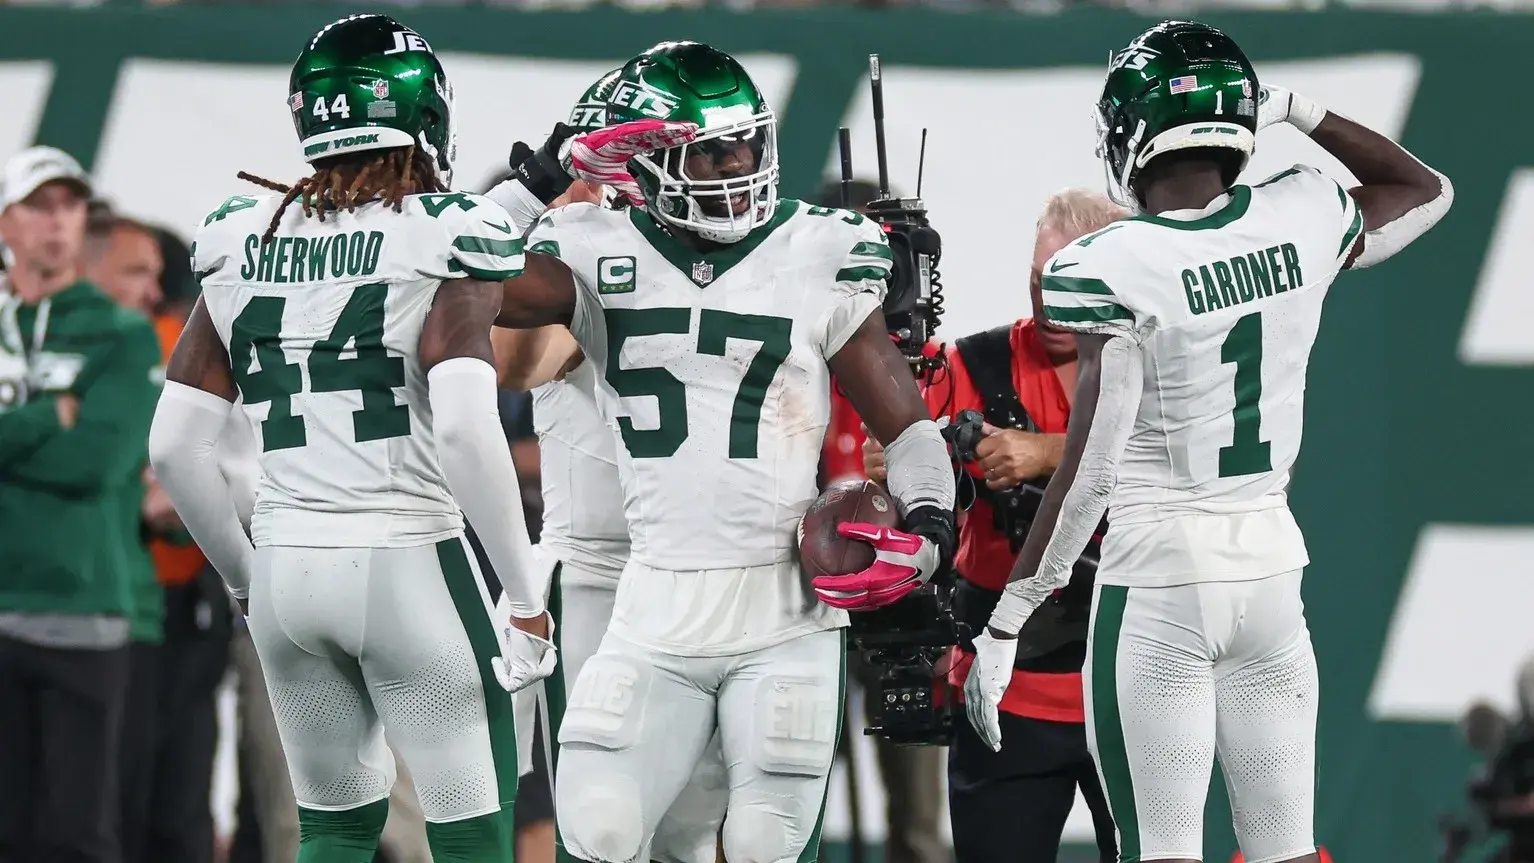 New York Jets linebacker C.J. Mosley (57) reacts after an interception during the first half against the Kansas City Chiefs at MetLife Stadium. / Vincent Carchietta-USA TODAY Sports